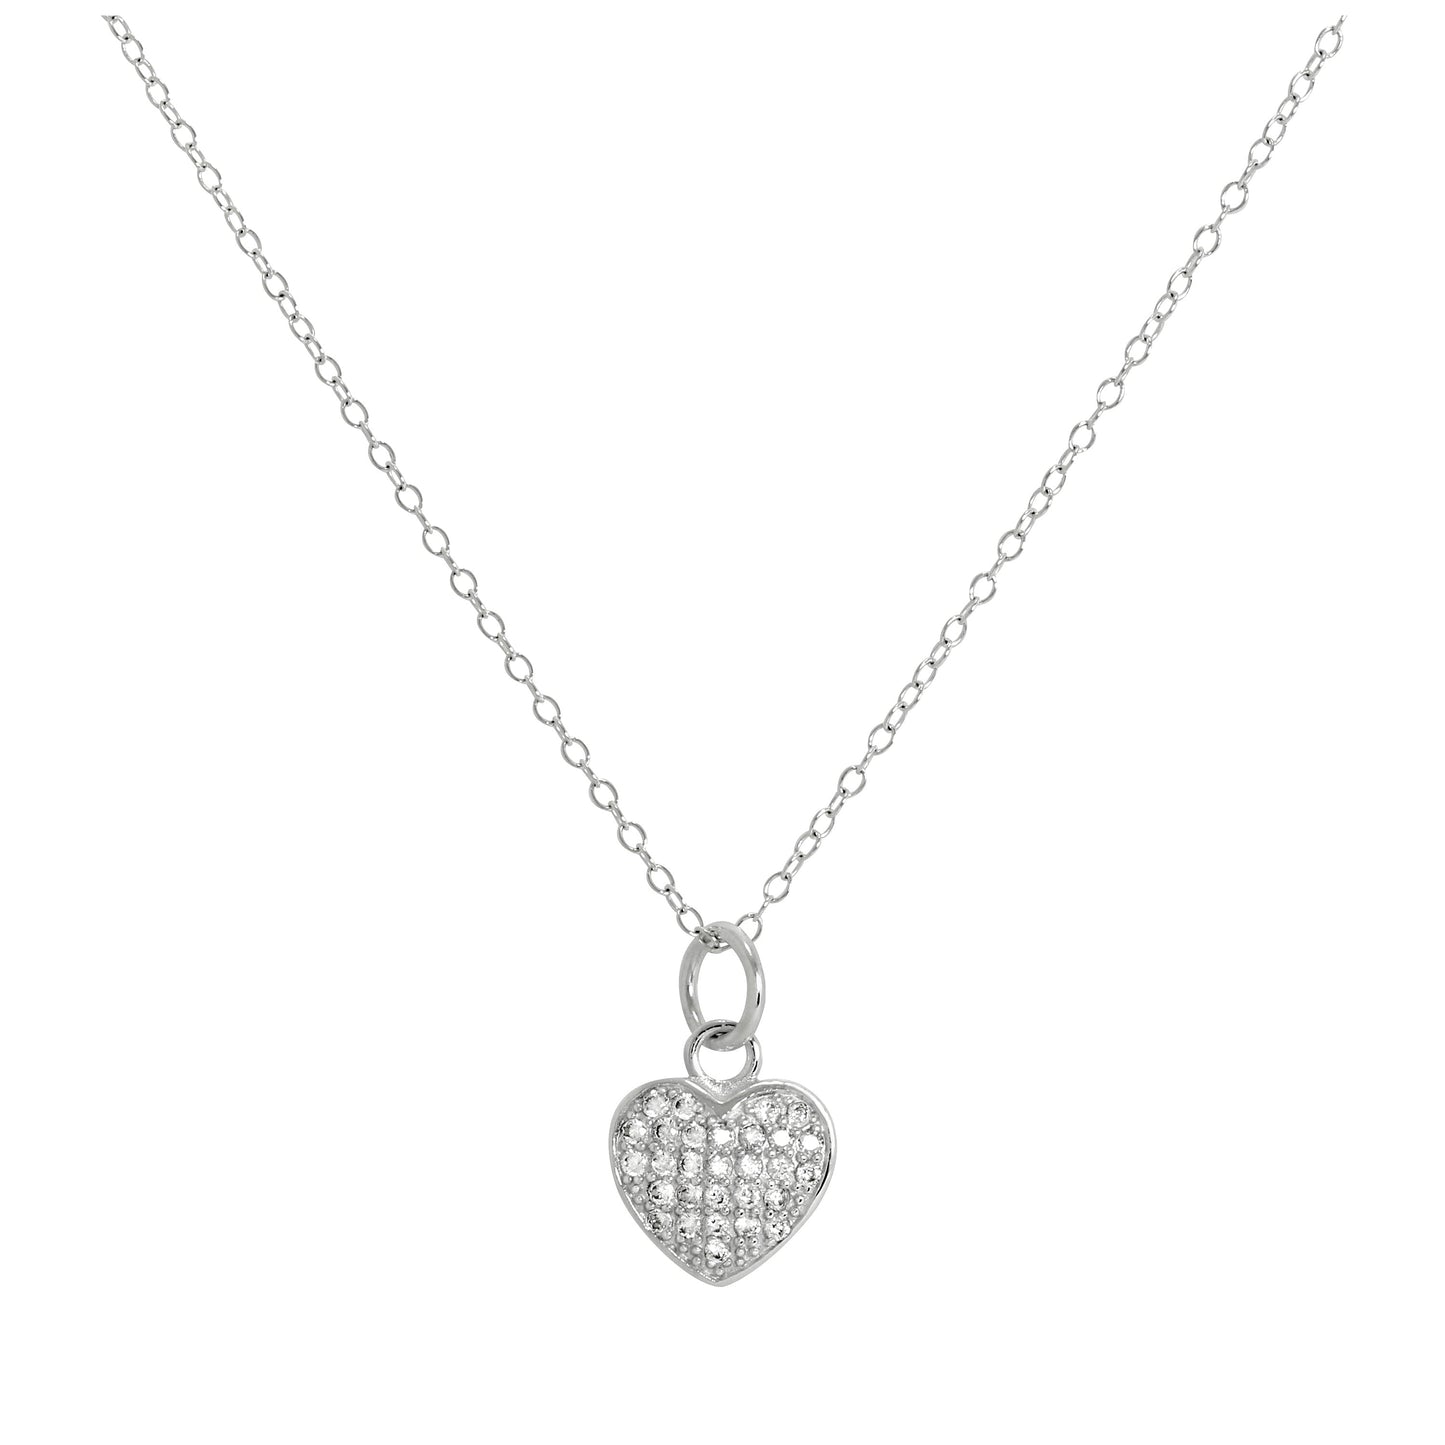 Sterling Silver & CZ Crystal Encrusted Heart Pendant Necklace 14 - 32 Inches